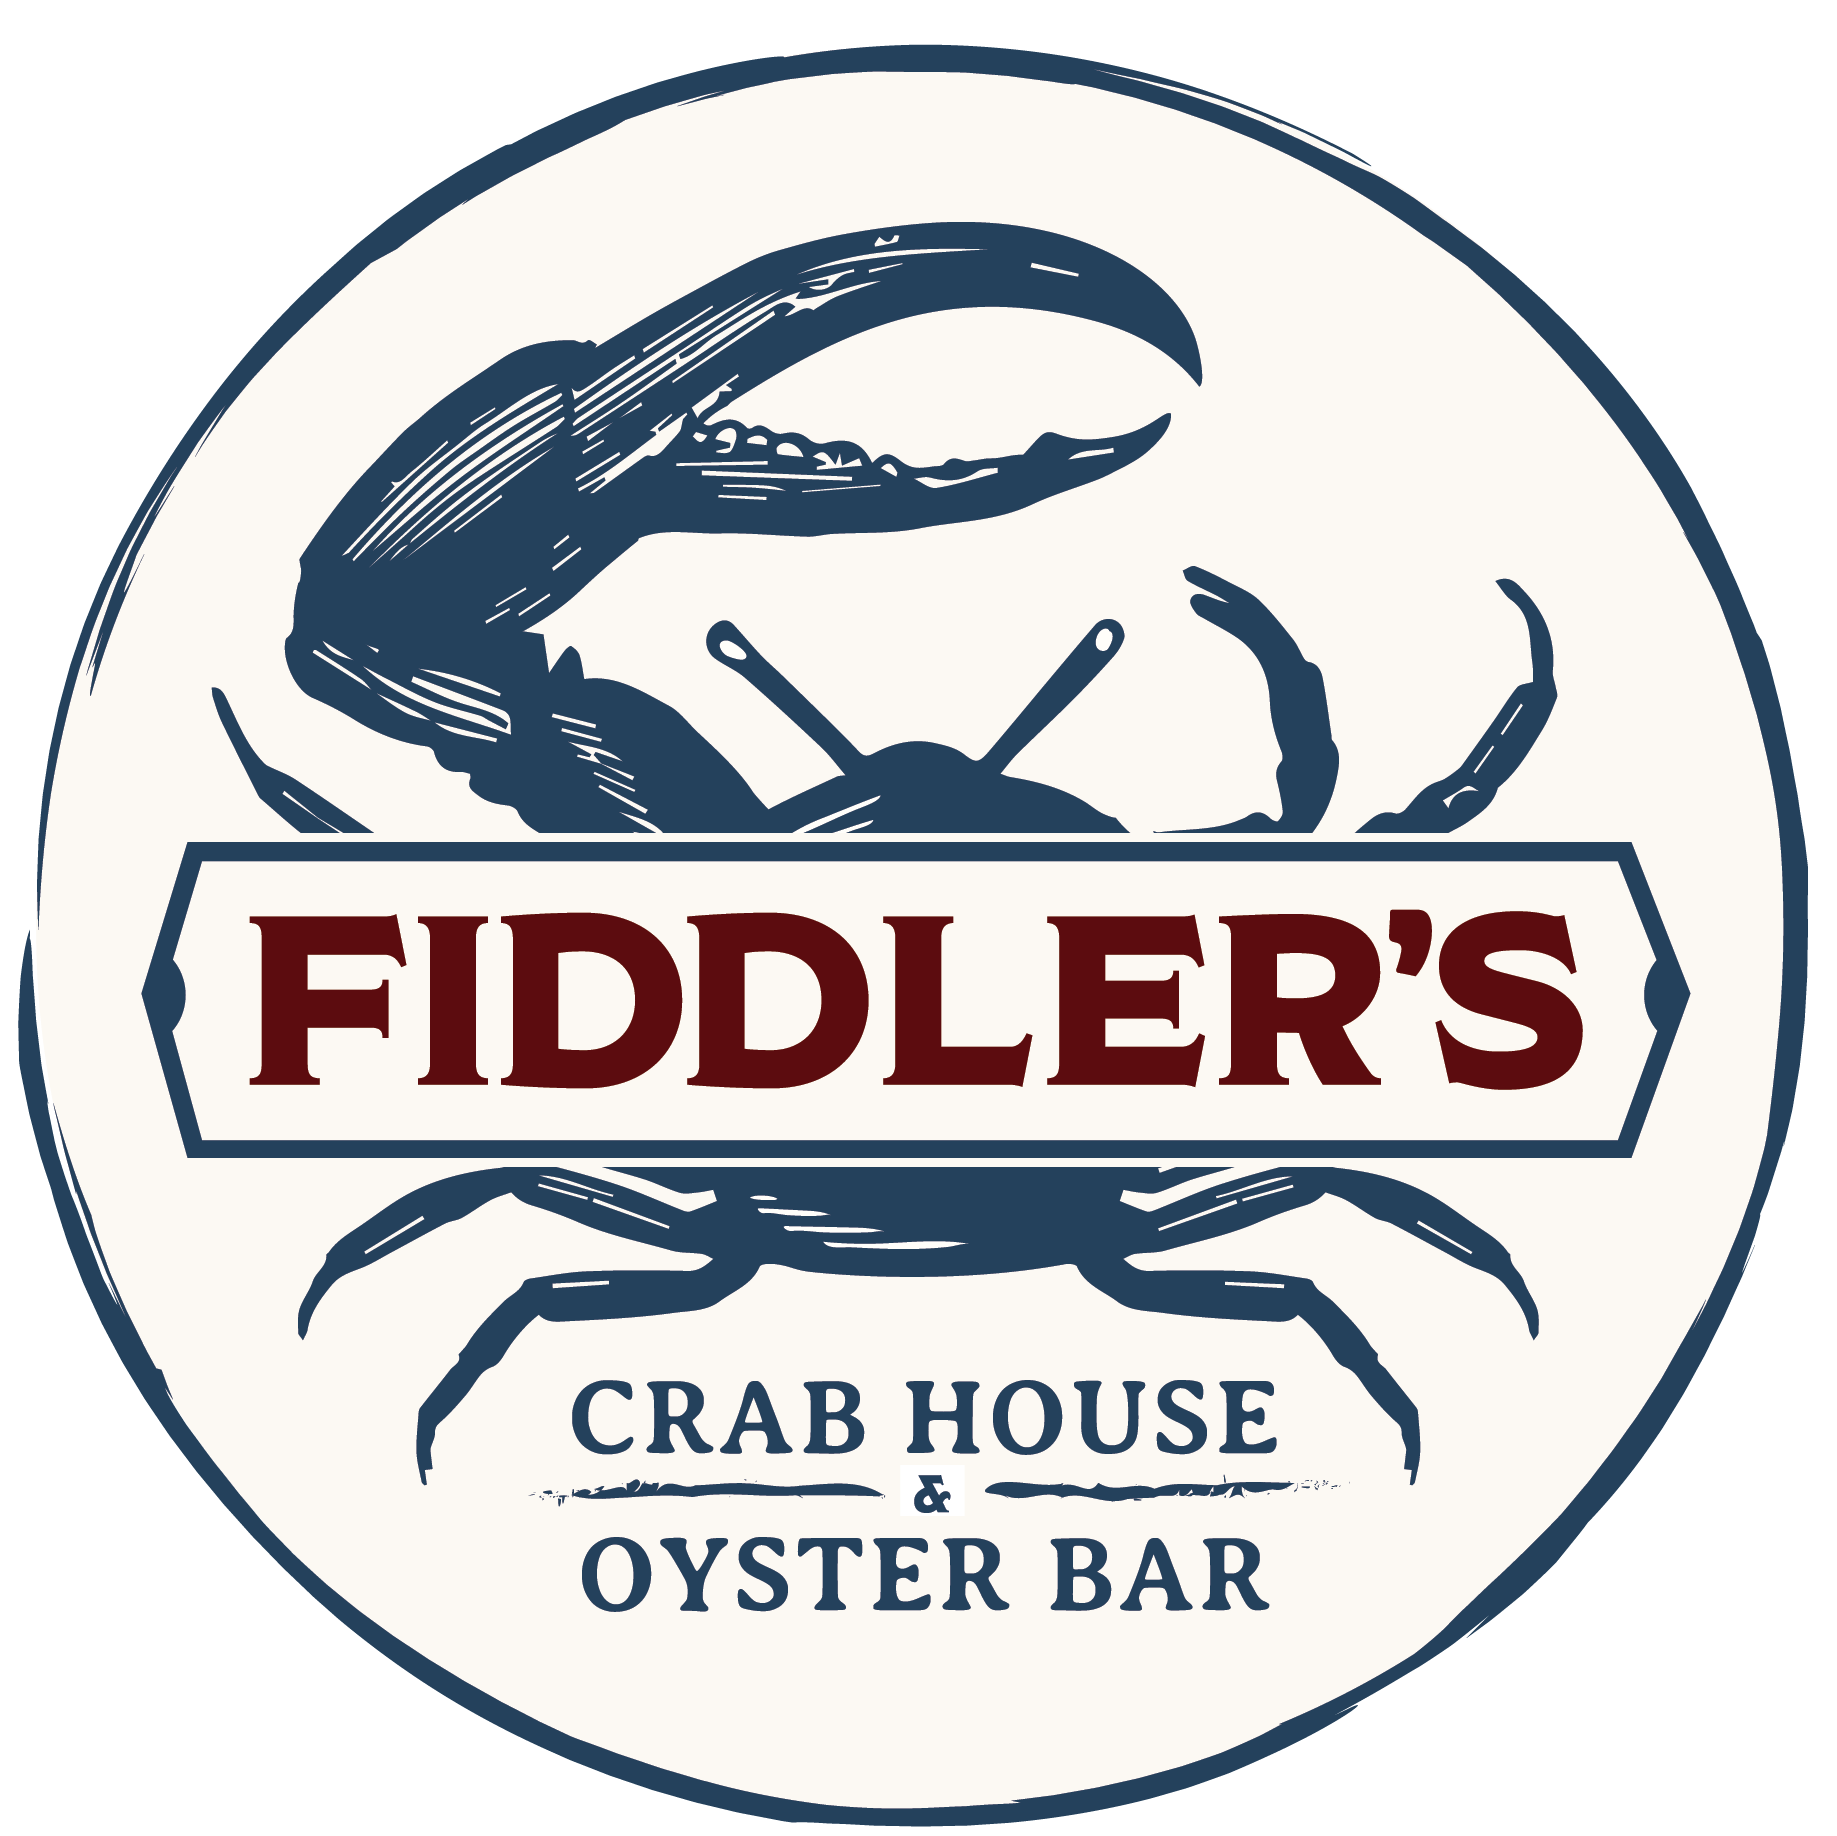 fiddler 's crab house and oyster bar logo with a crab in a circle .